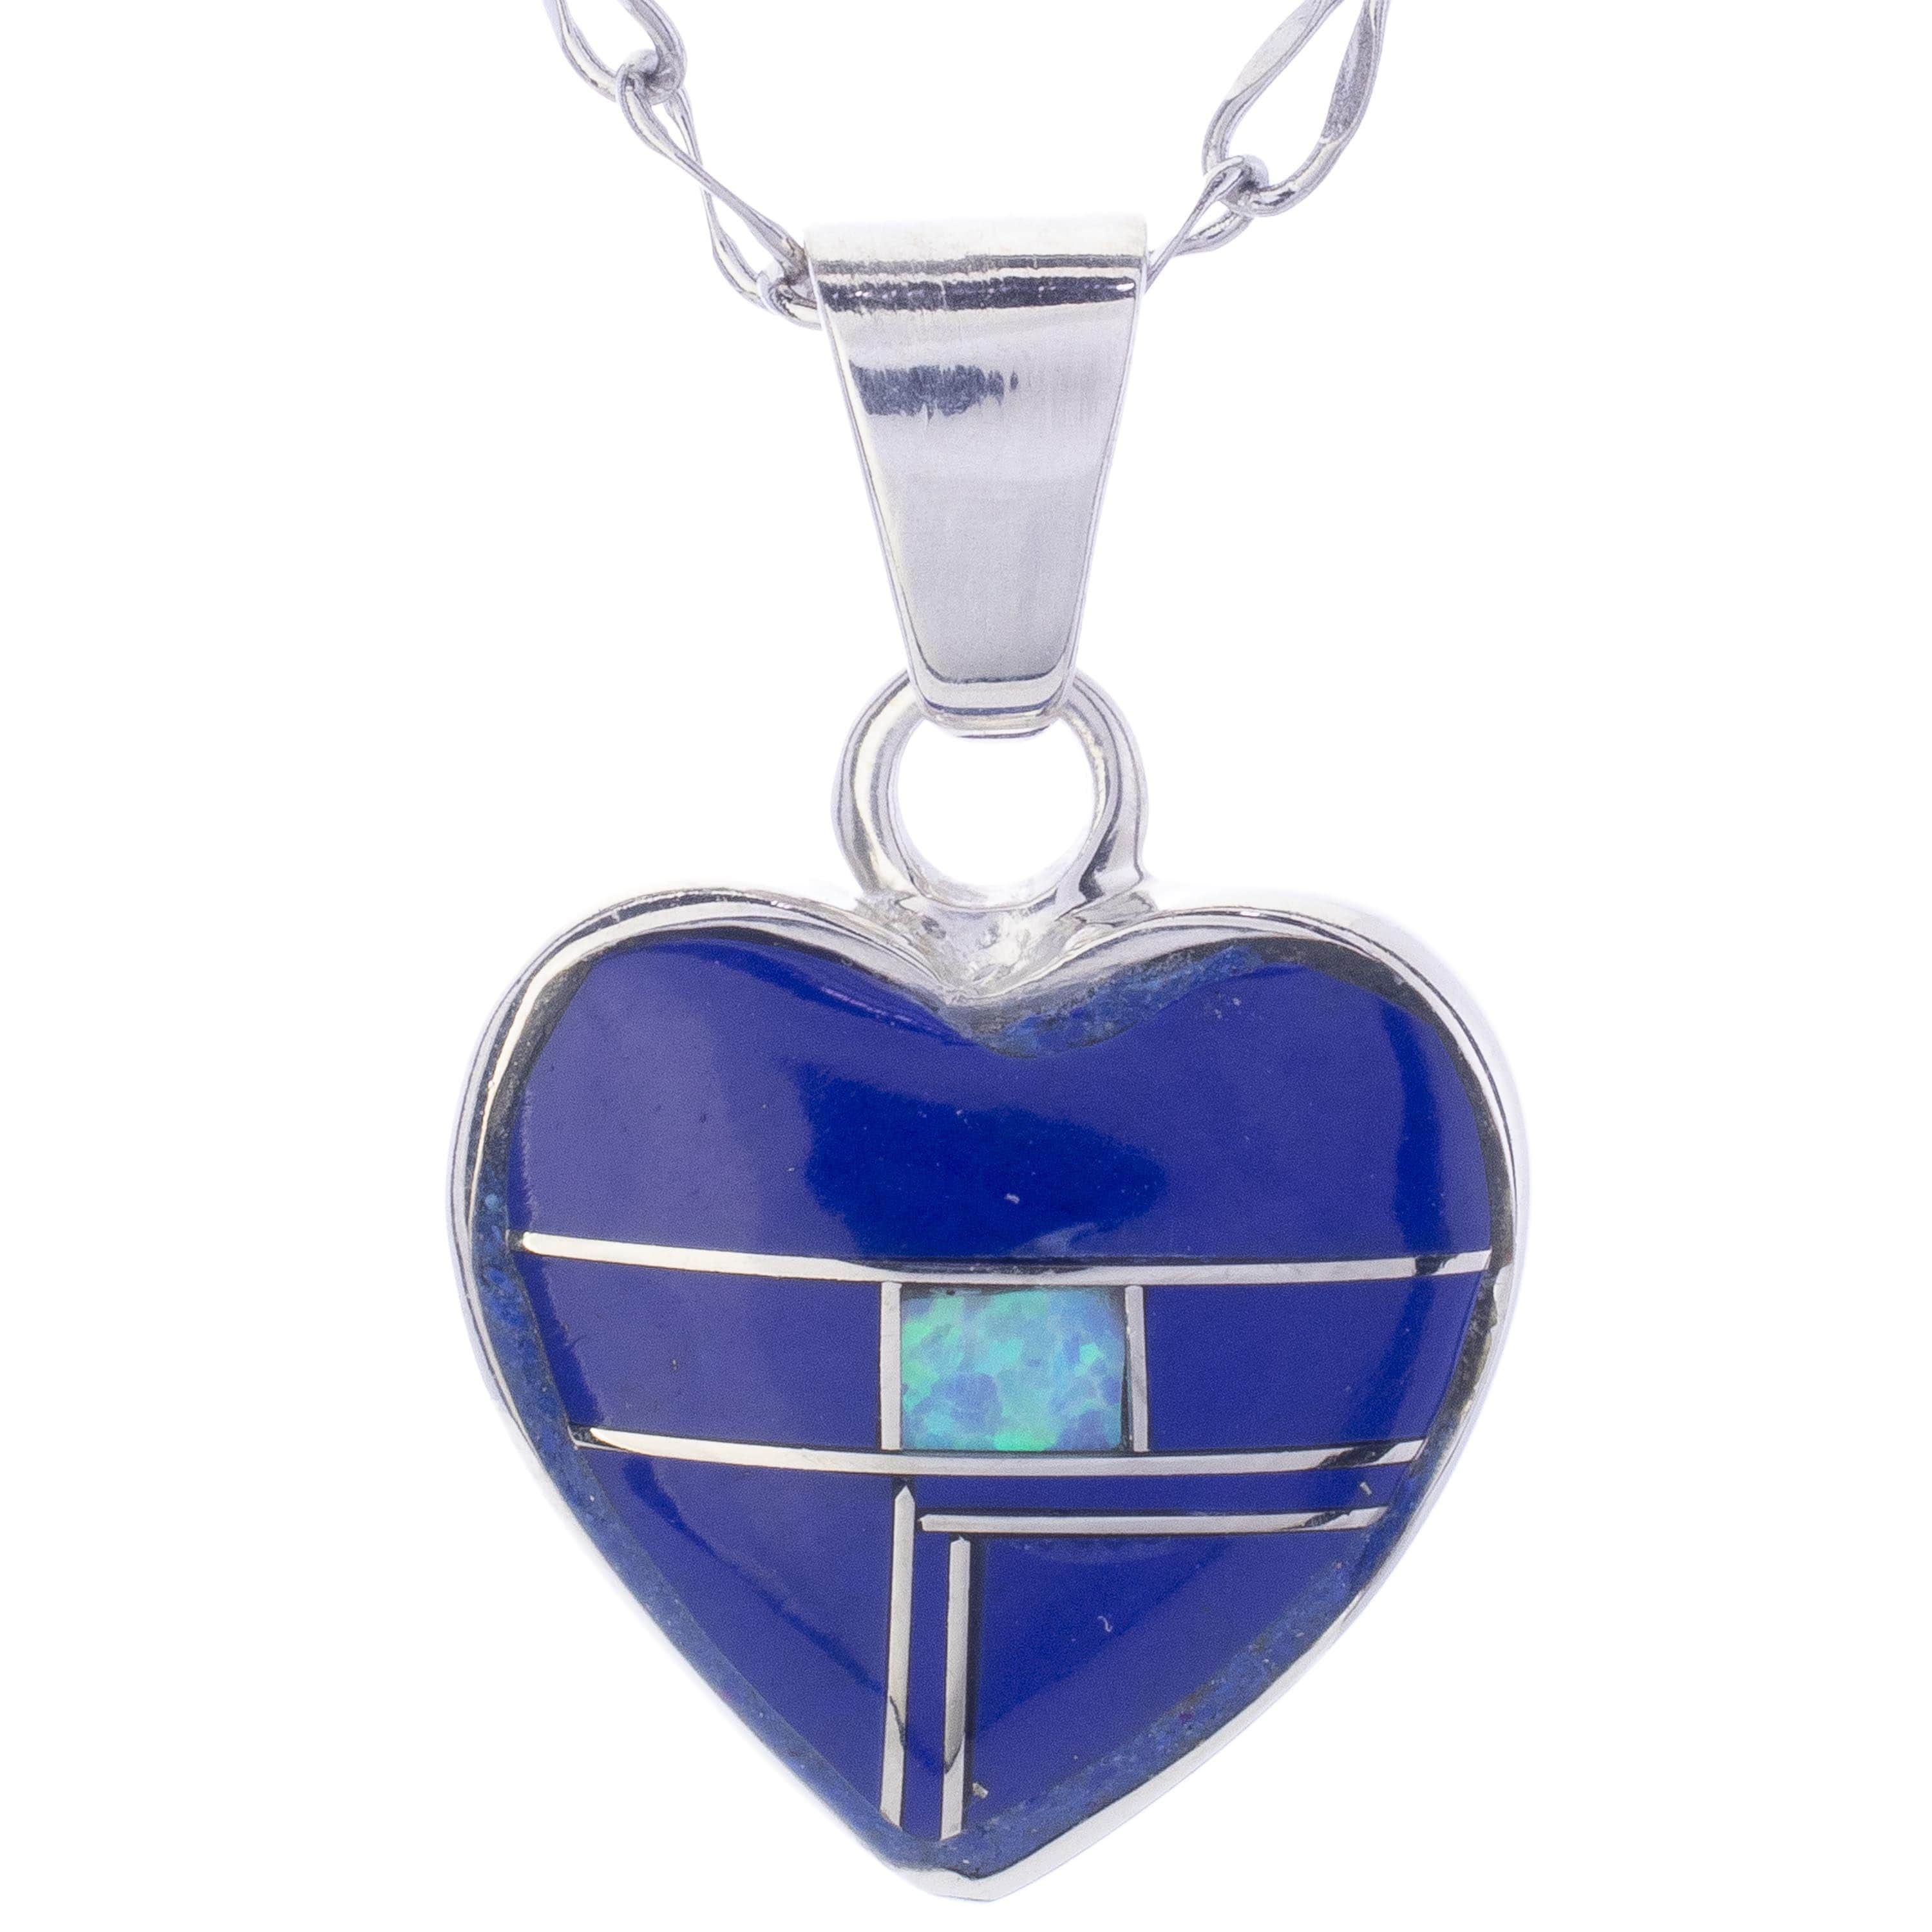 Kalifano Southwest Silver Jewelry Lapis Heart 925 Sterling Silver Pendant USA Handmade with Opal Accent NMN.2240.LP